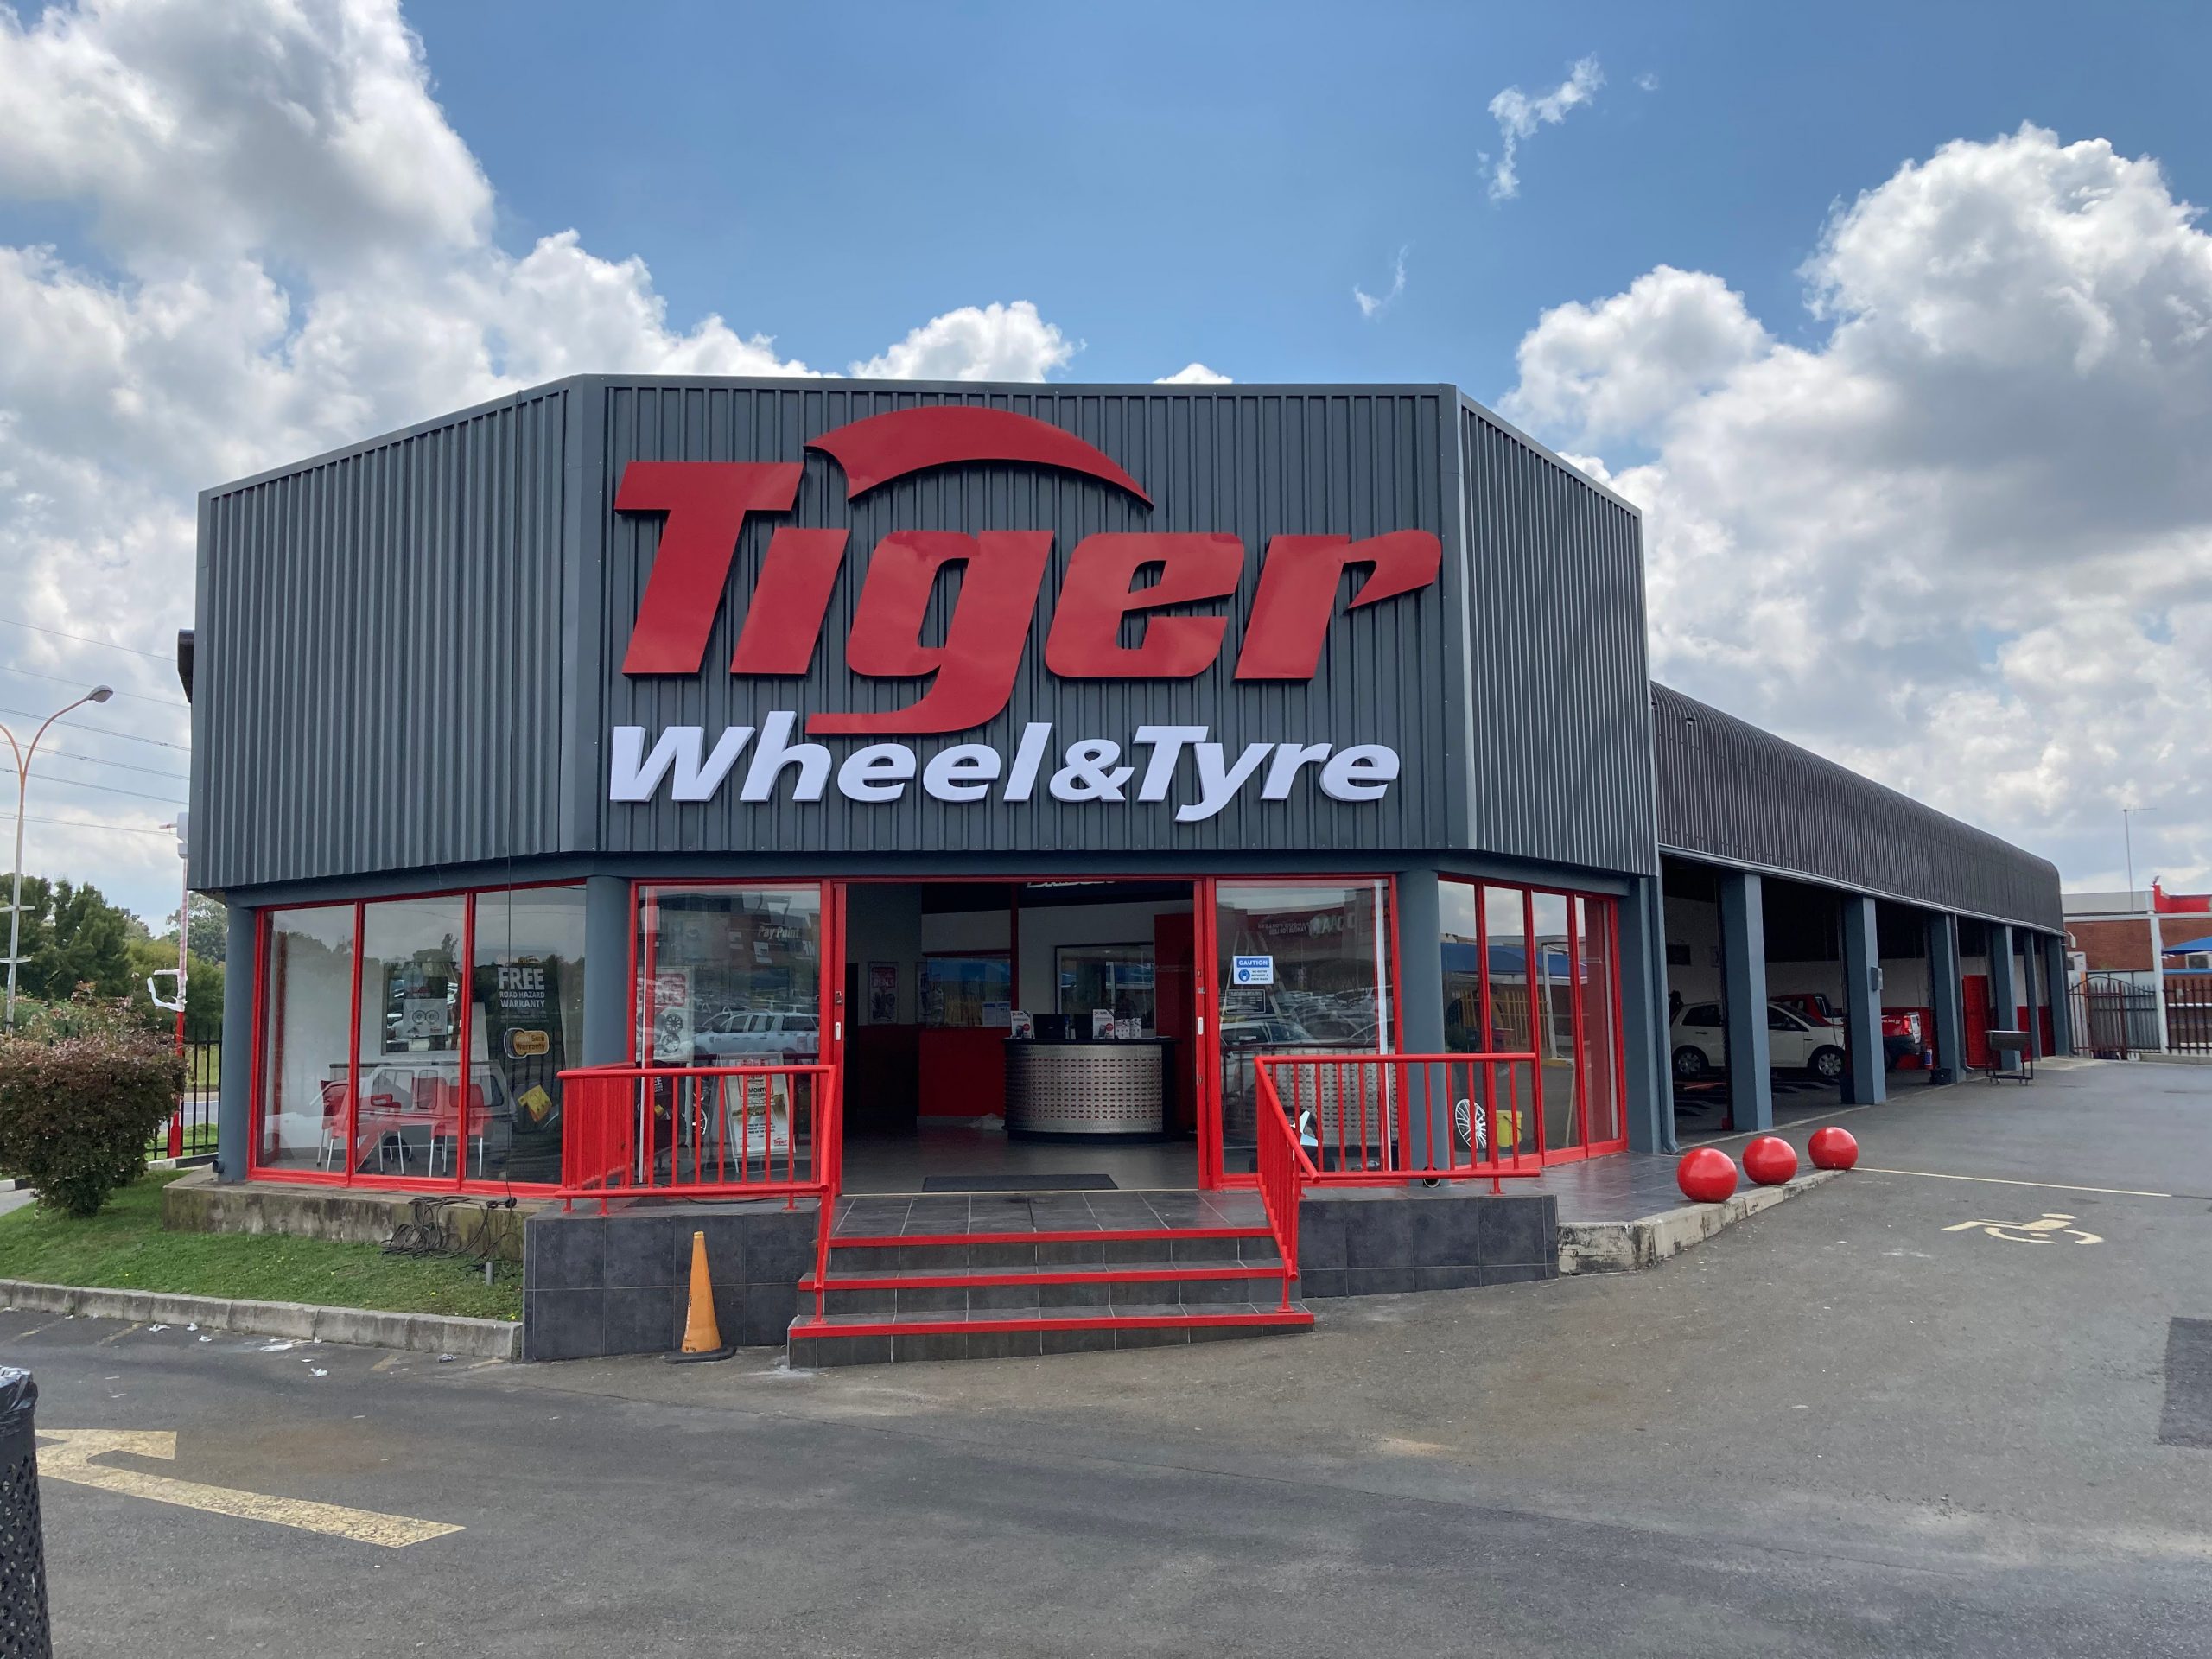 New Tiger Wheel & Tyre Fitment Centre Opens Its Doors